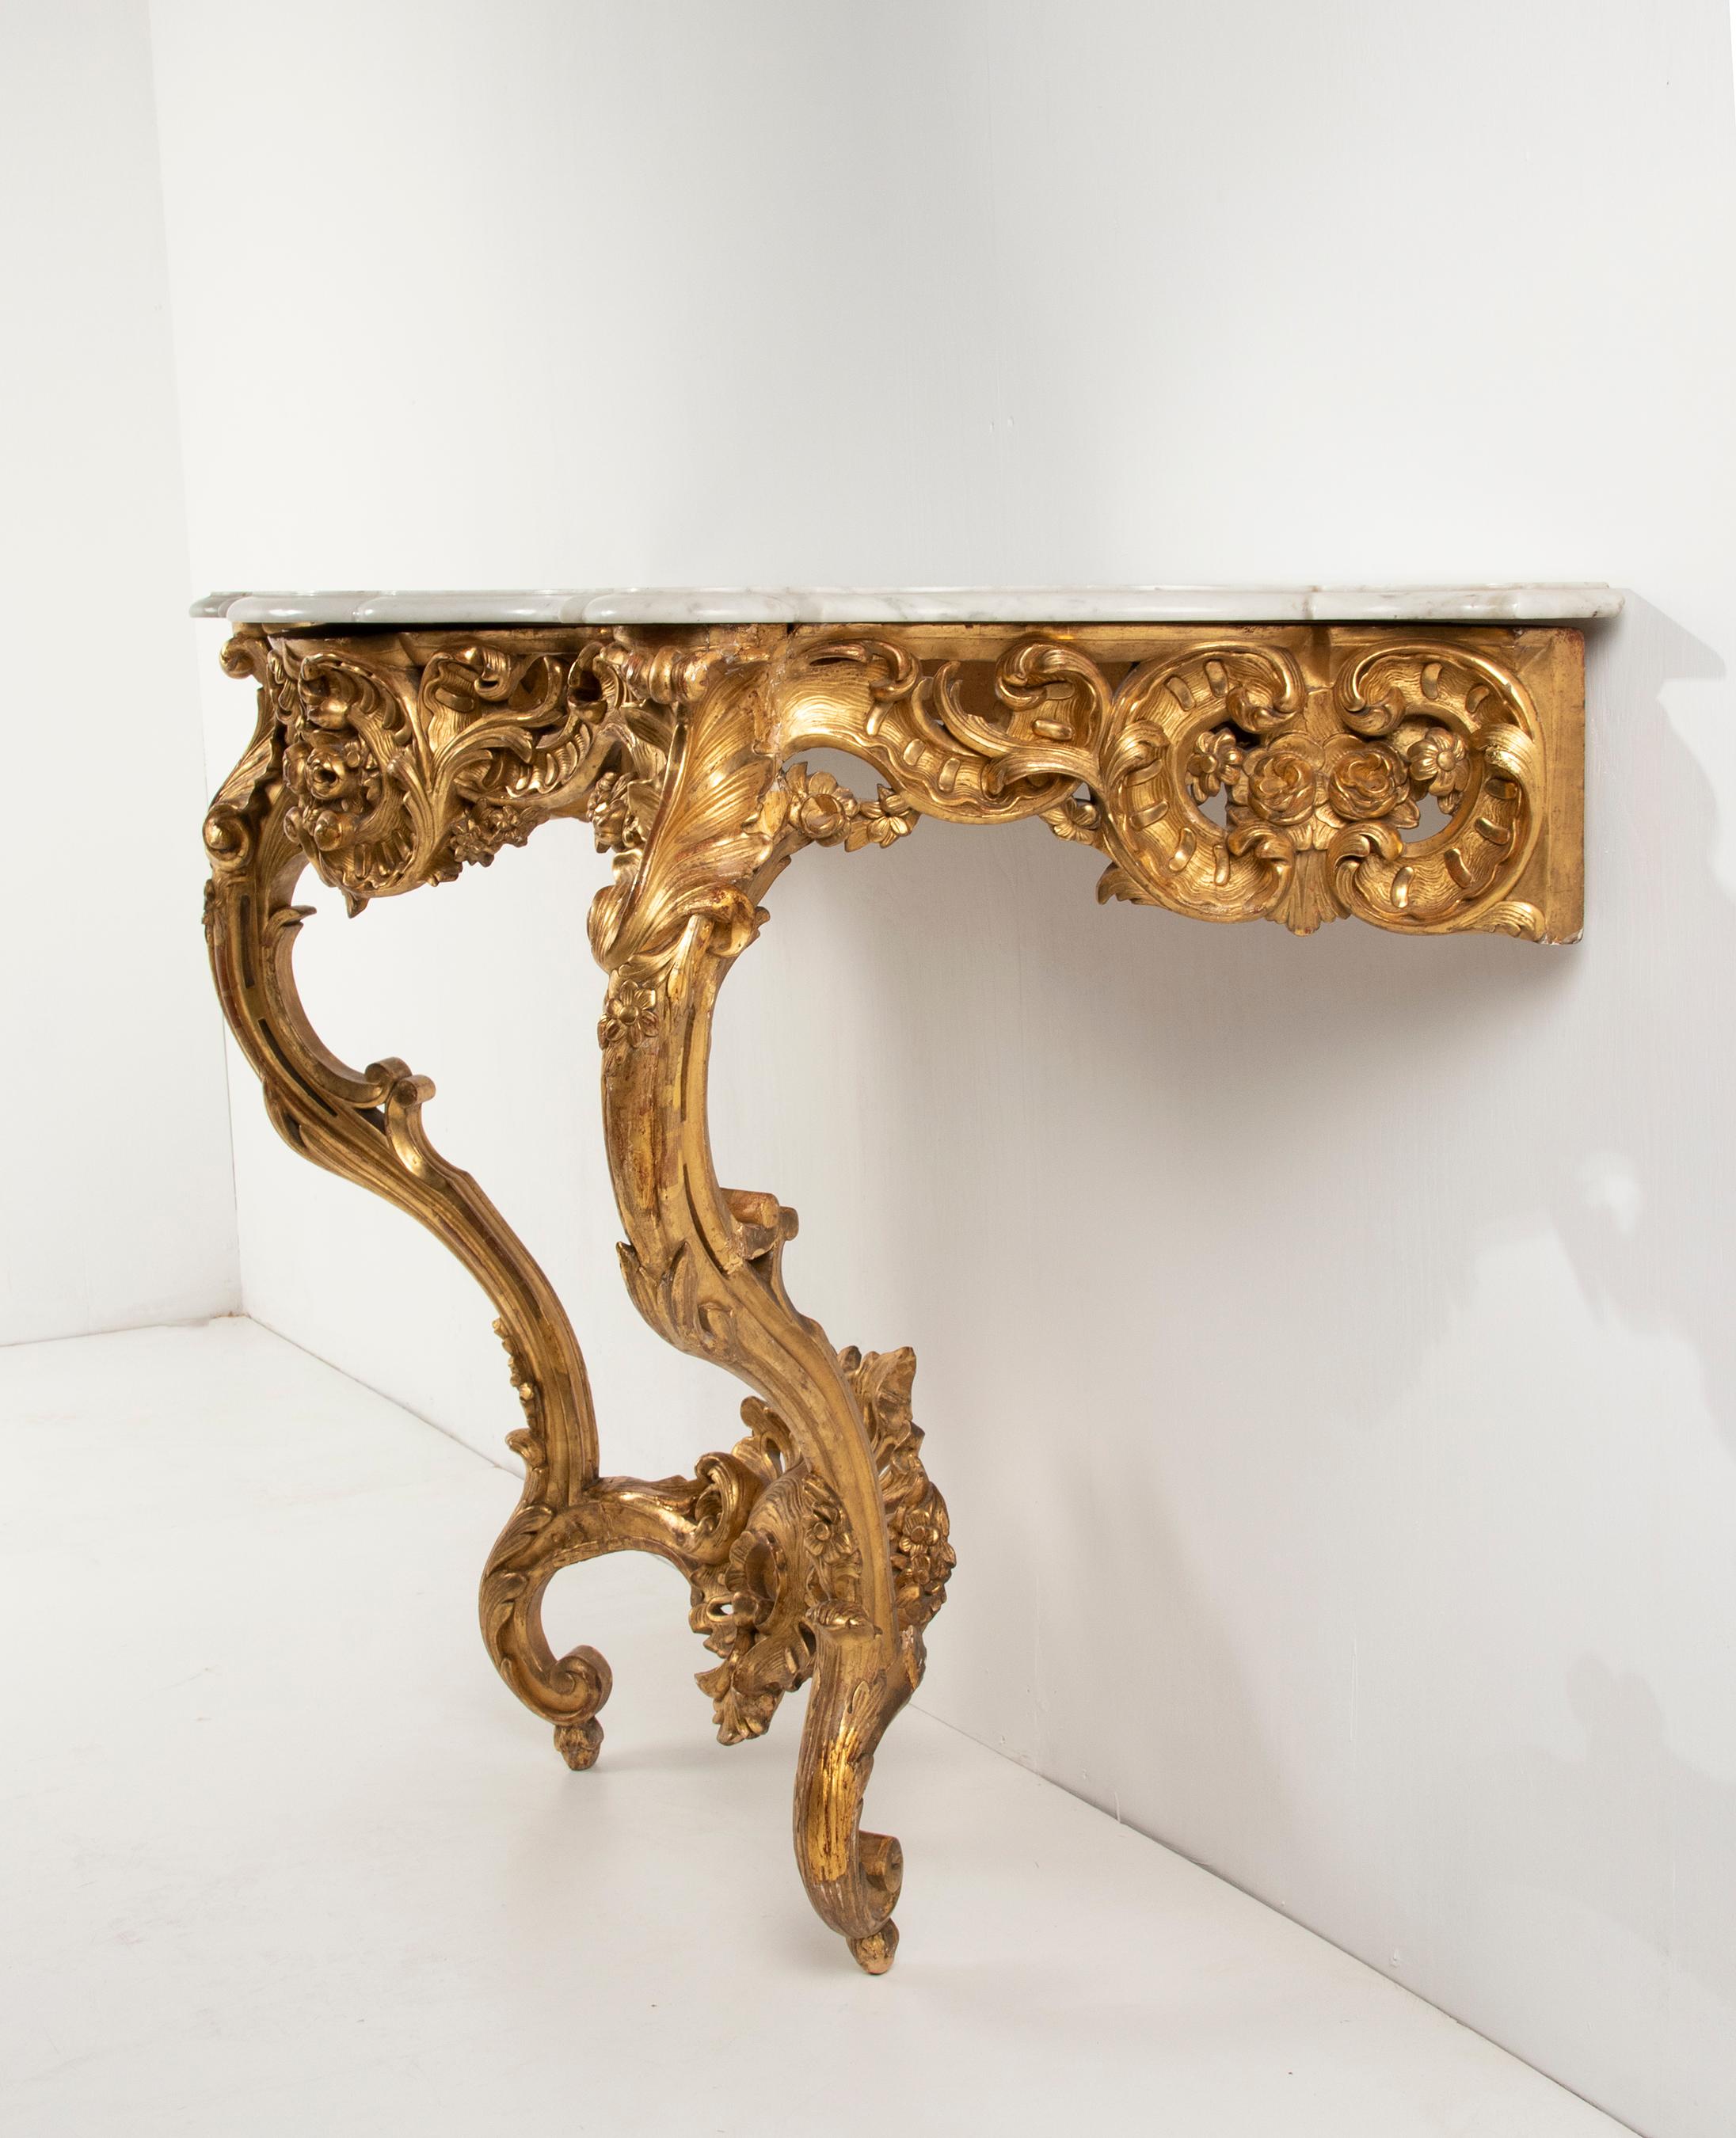 19th Century French Wooden Carved and Gilded Console Table by Maison Janiaud In Good Condition For Sale In Casteren, Noord-Brabant